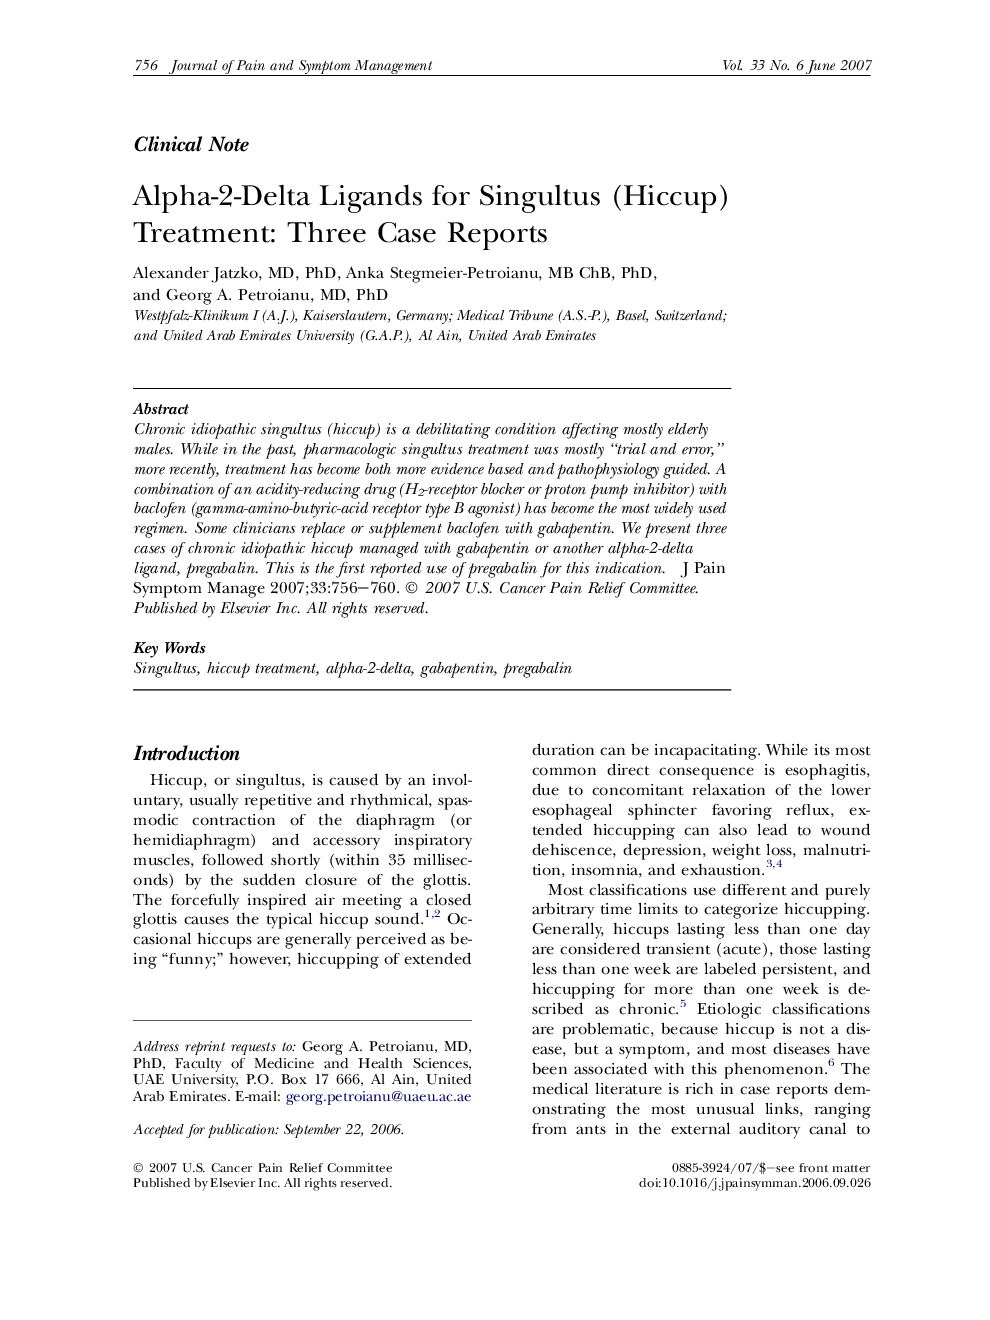 Alpha-2-Delta Ligands for Singultus (Hiccup) Treatment: Three Case Reports